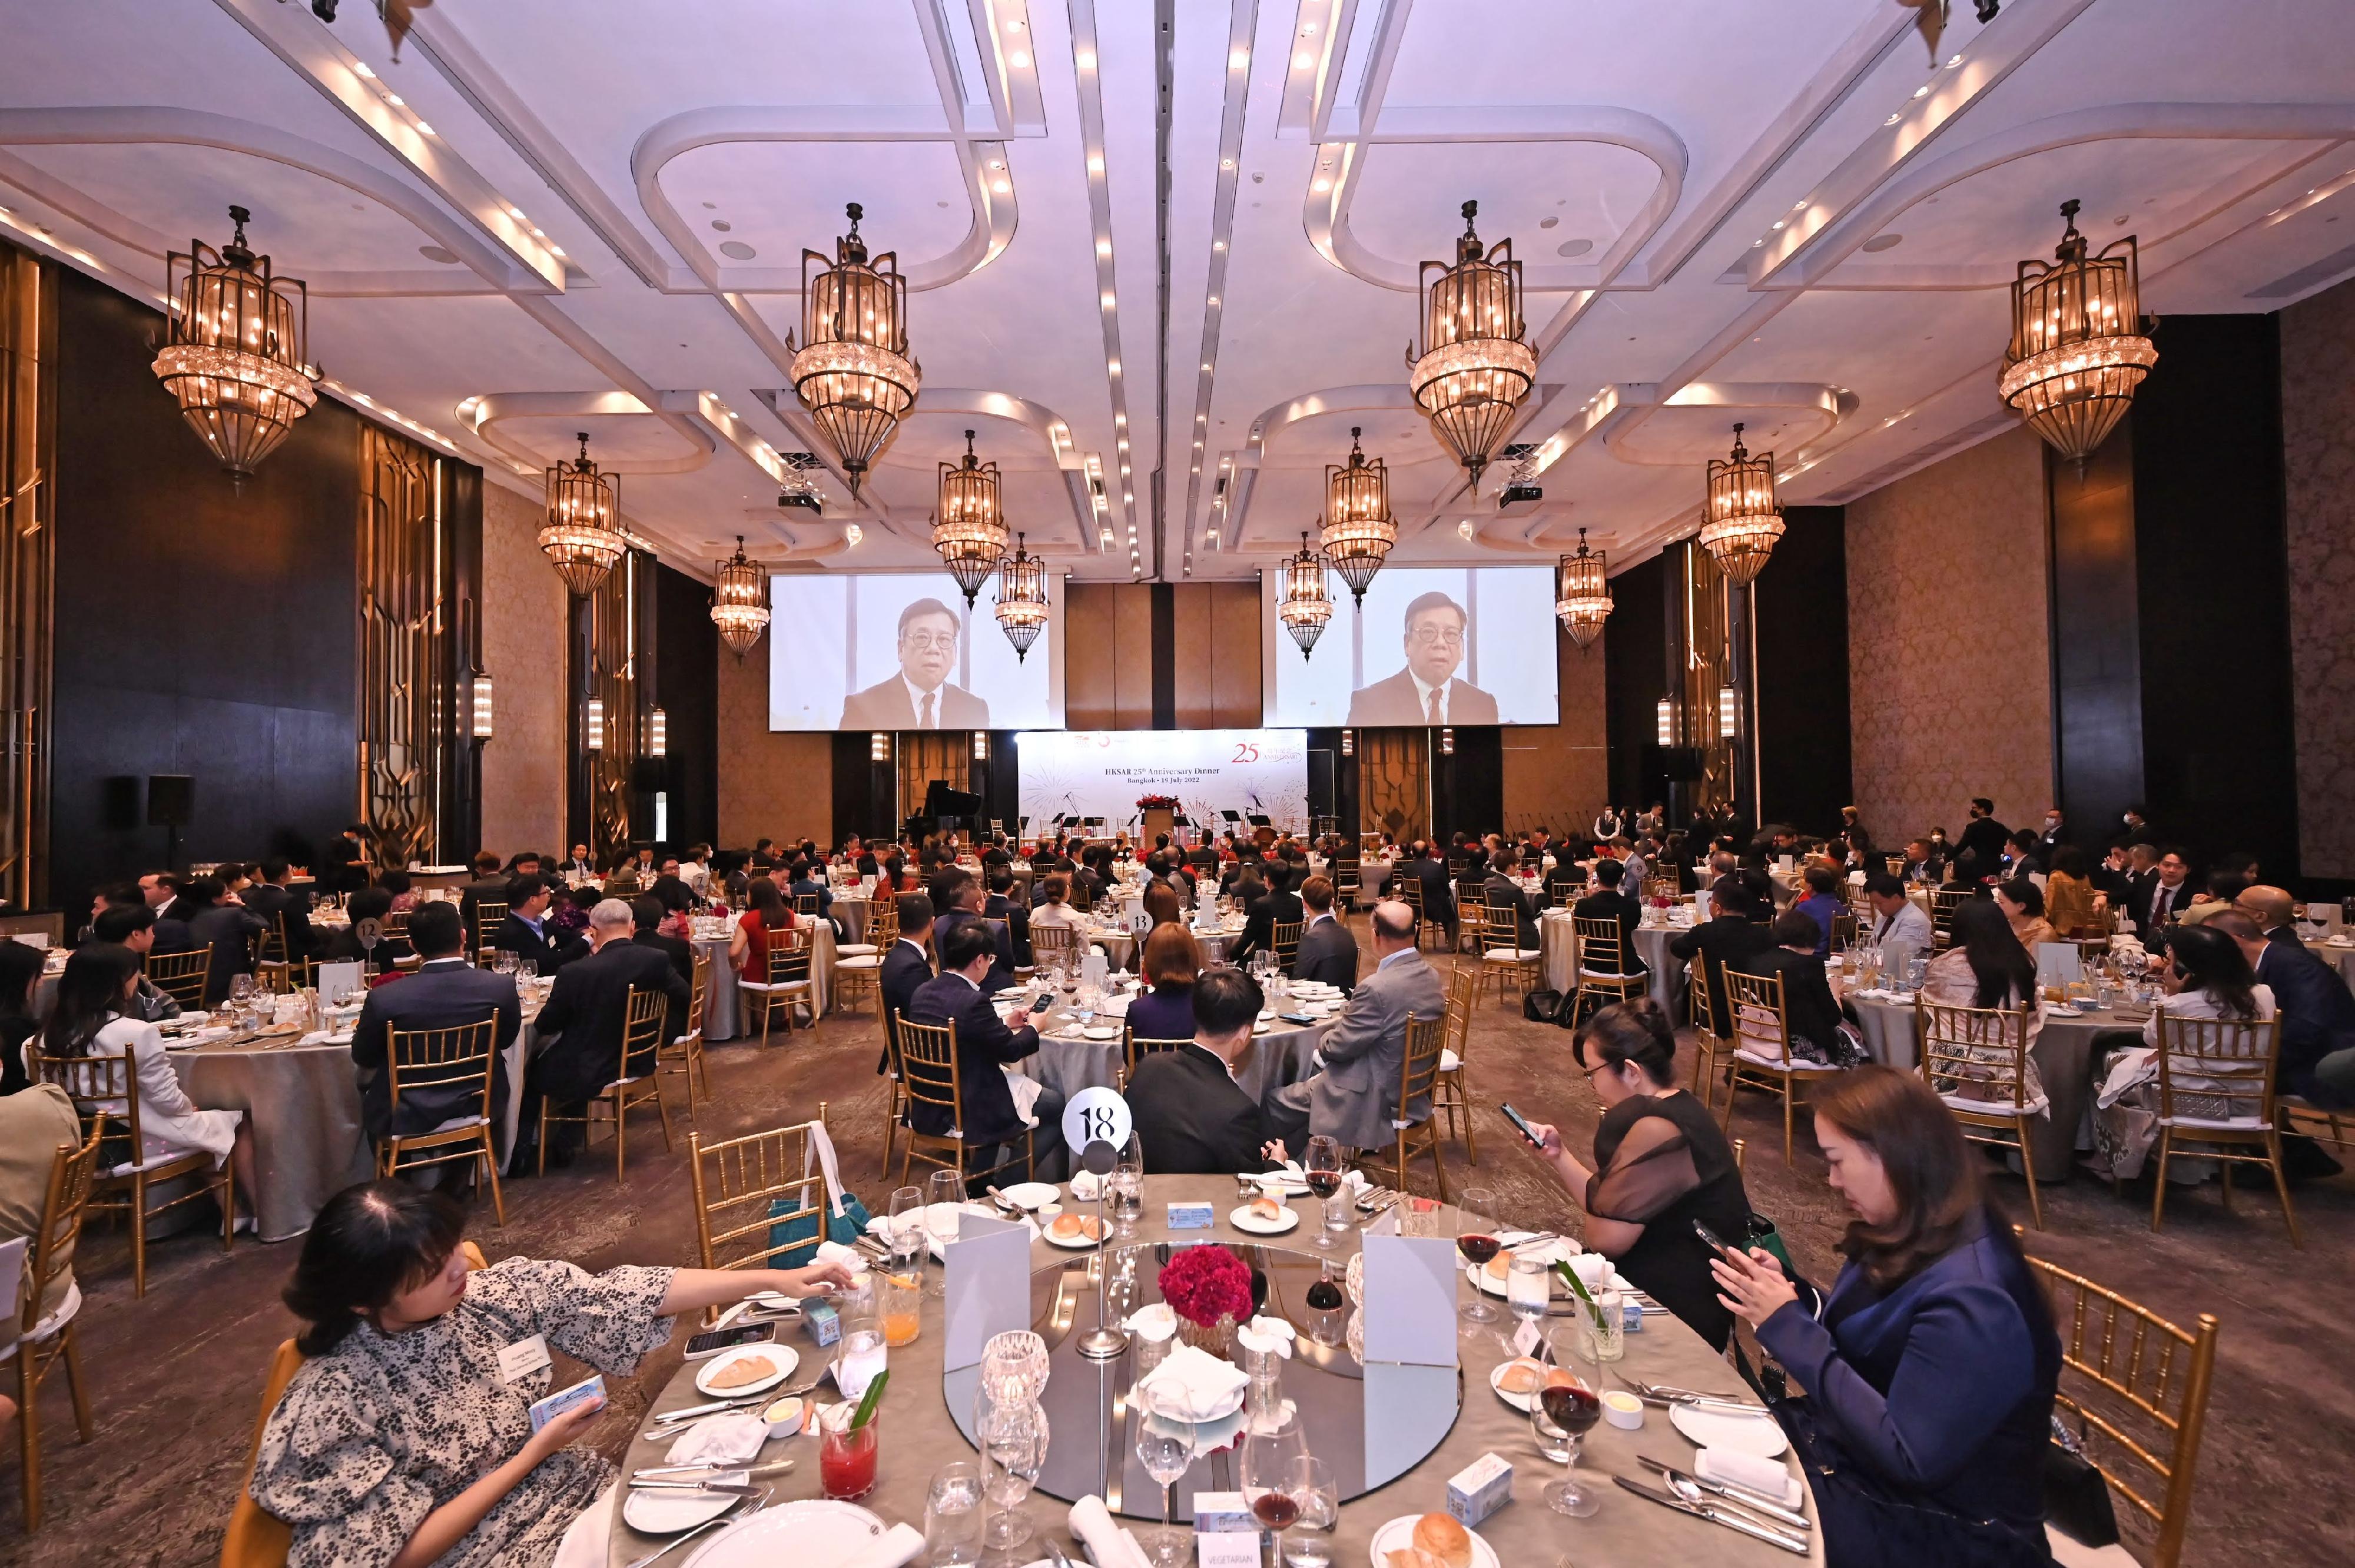 The Secretary for Commerce and Economic Development, Mr Algernon Yau, joined the business dinner in Bangkok on July 19, virtually to address the audience.